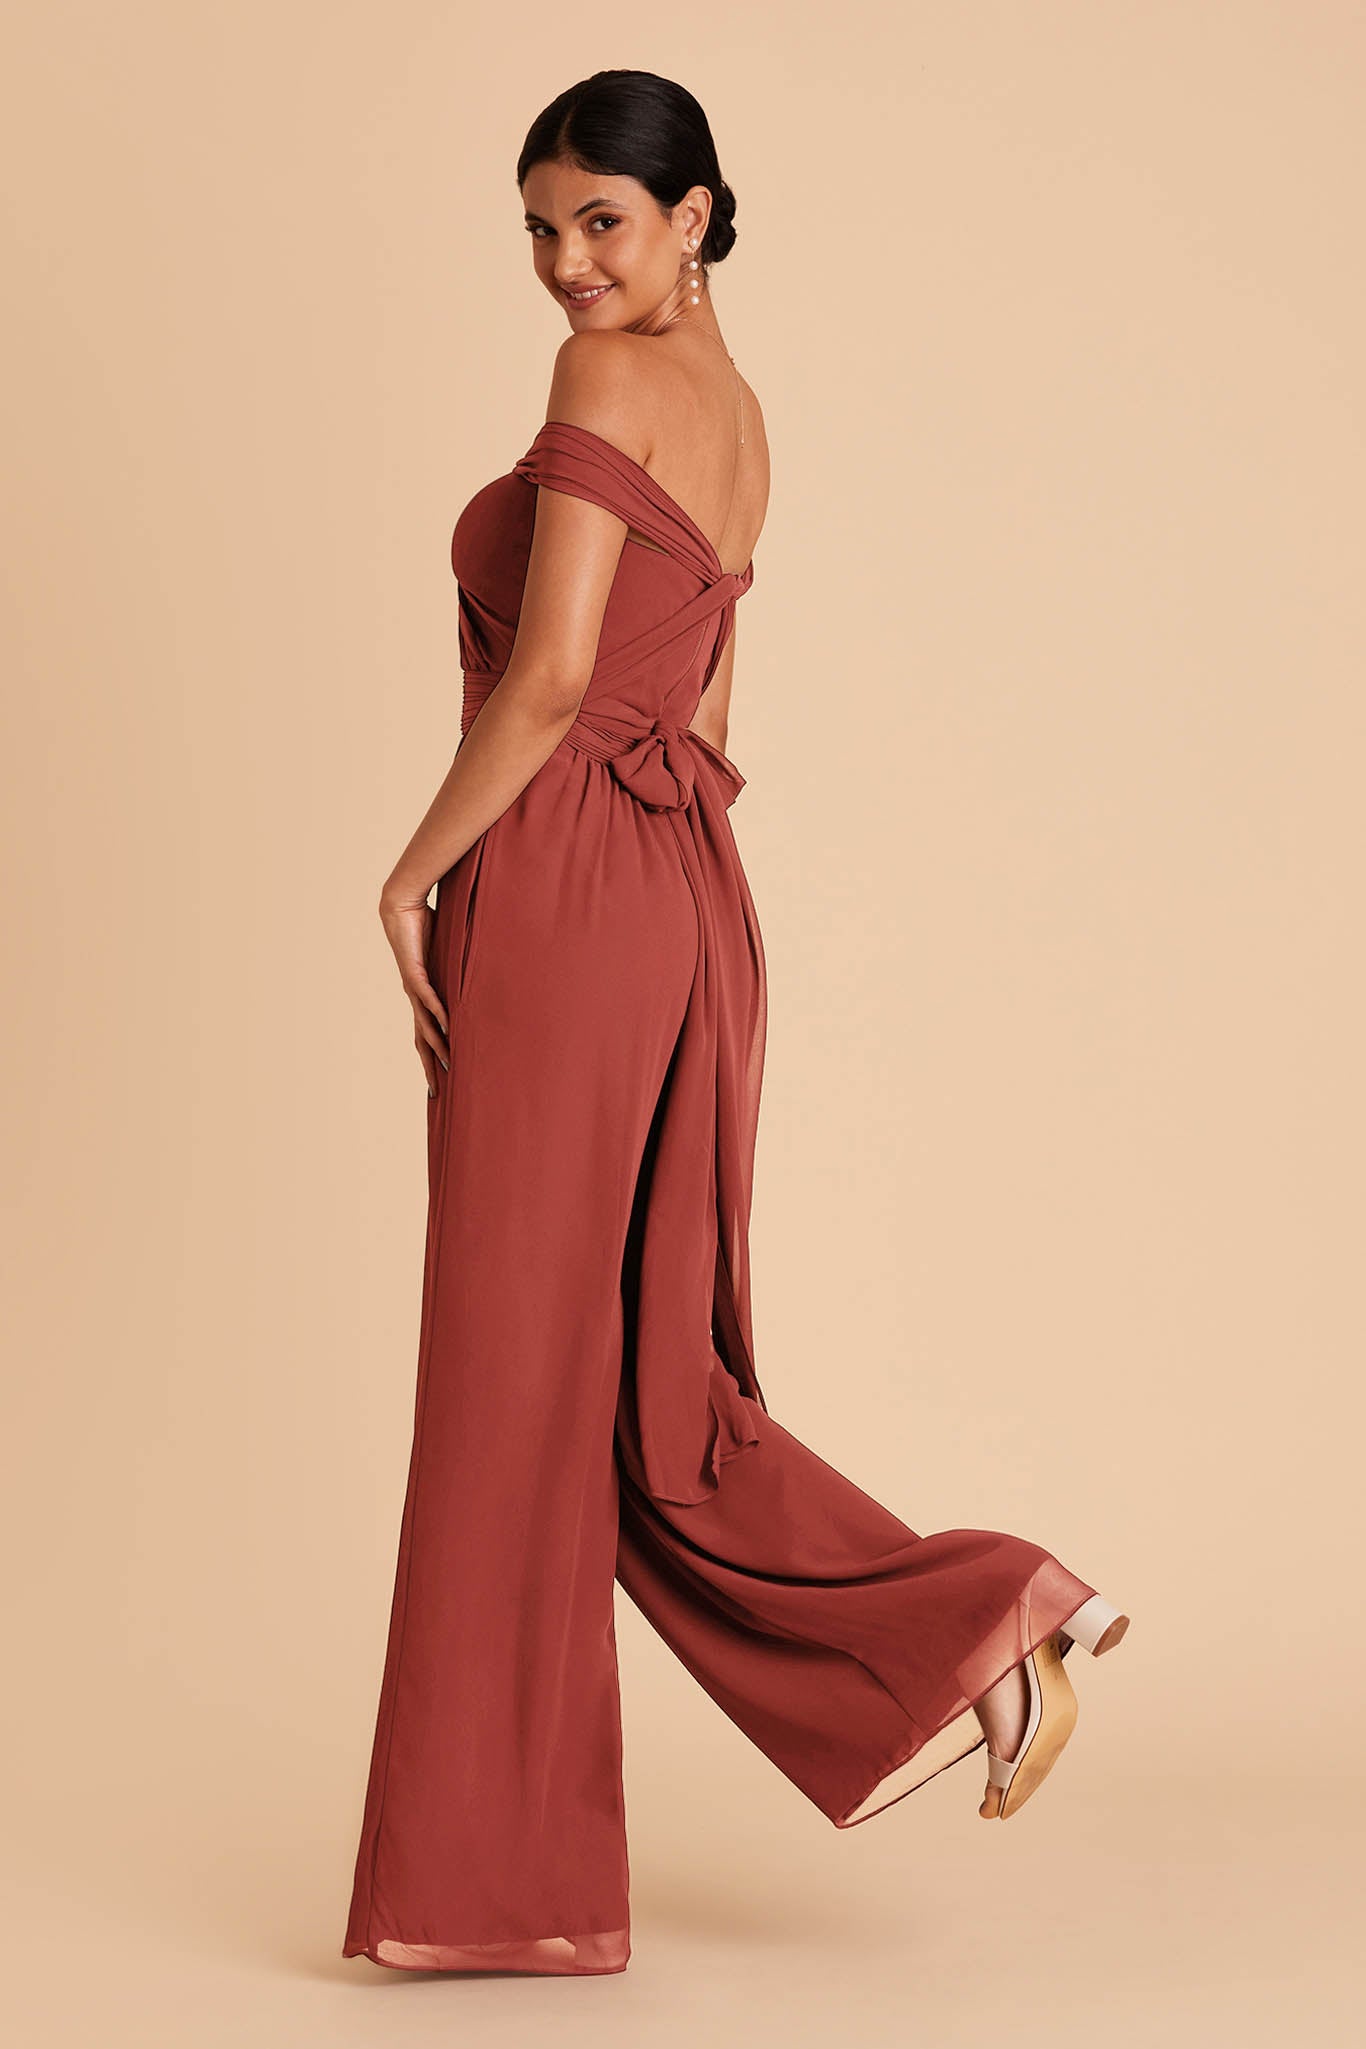 Reddish orange color wedding jumpsuit with sweetheart bodice with convertible neckline tie in the back